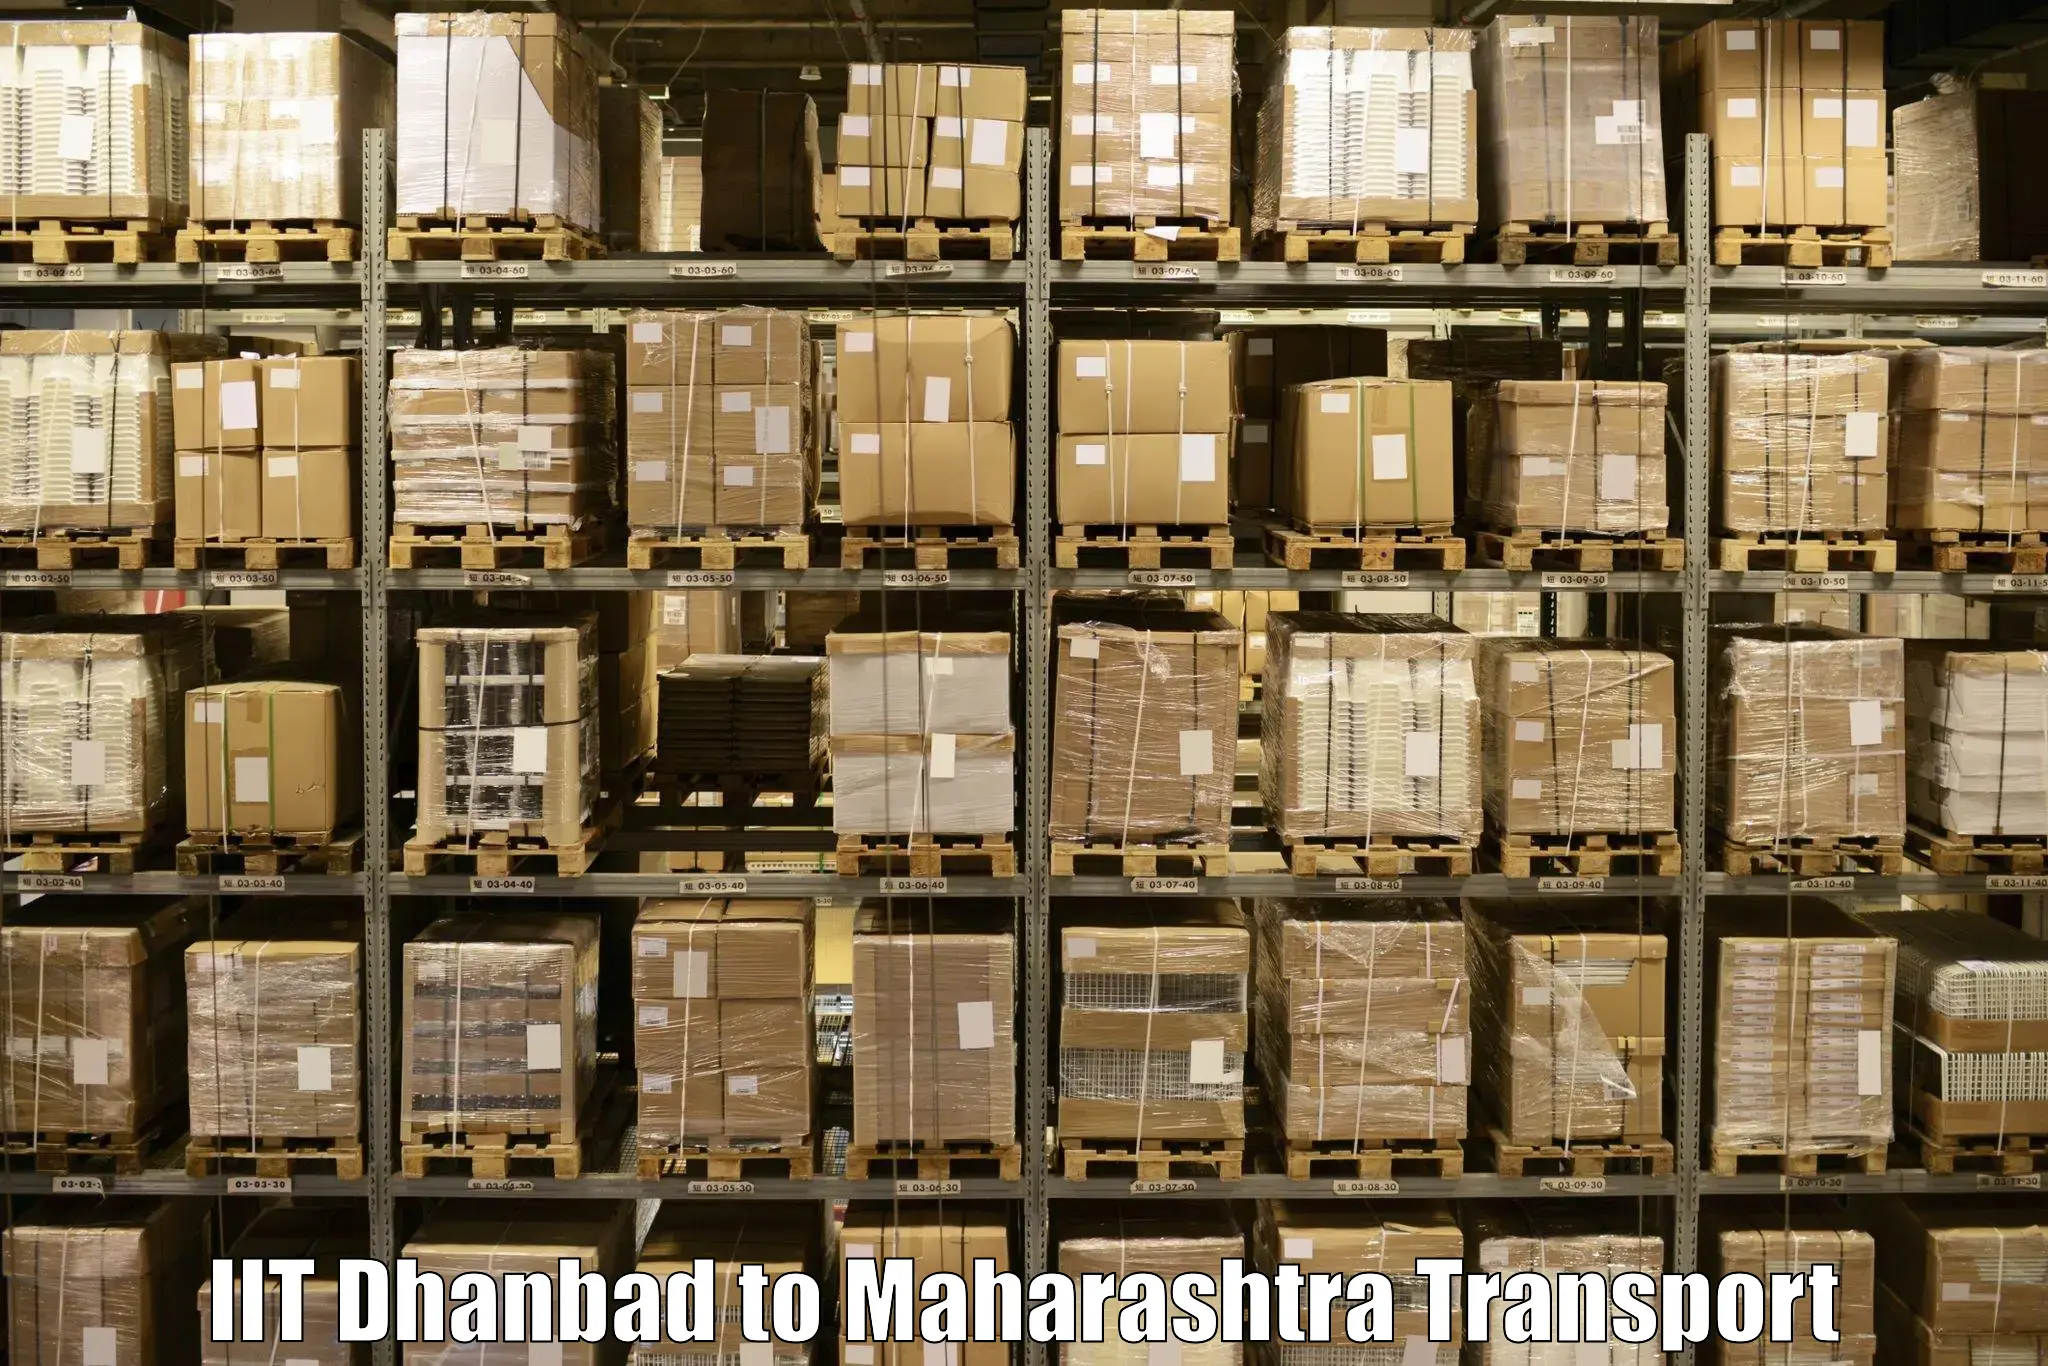 Nearby transport service IIT Dhanbad to Solapur